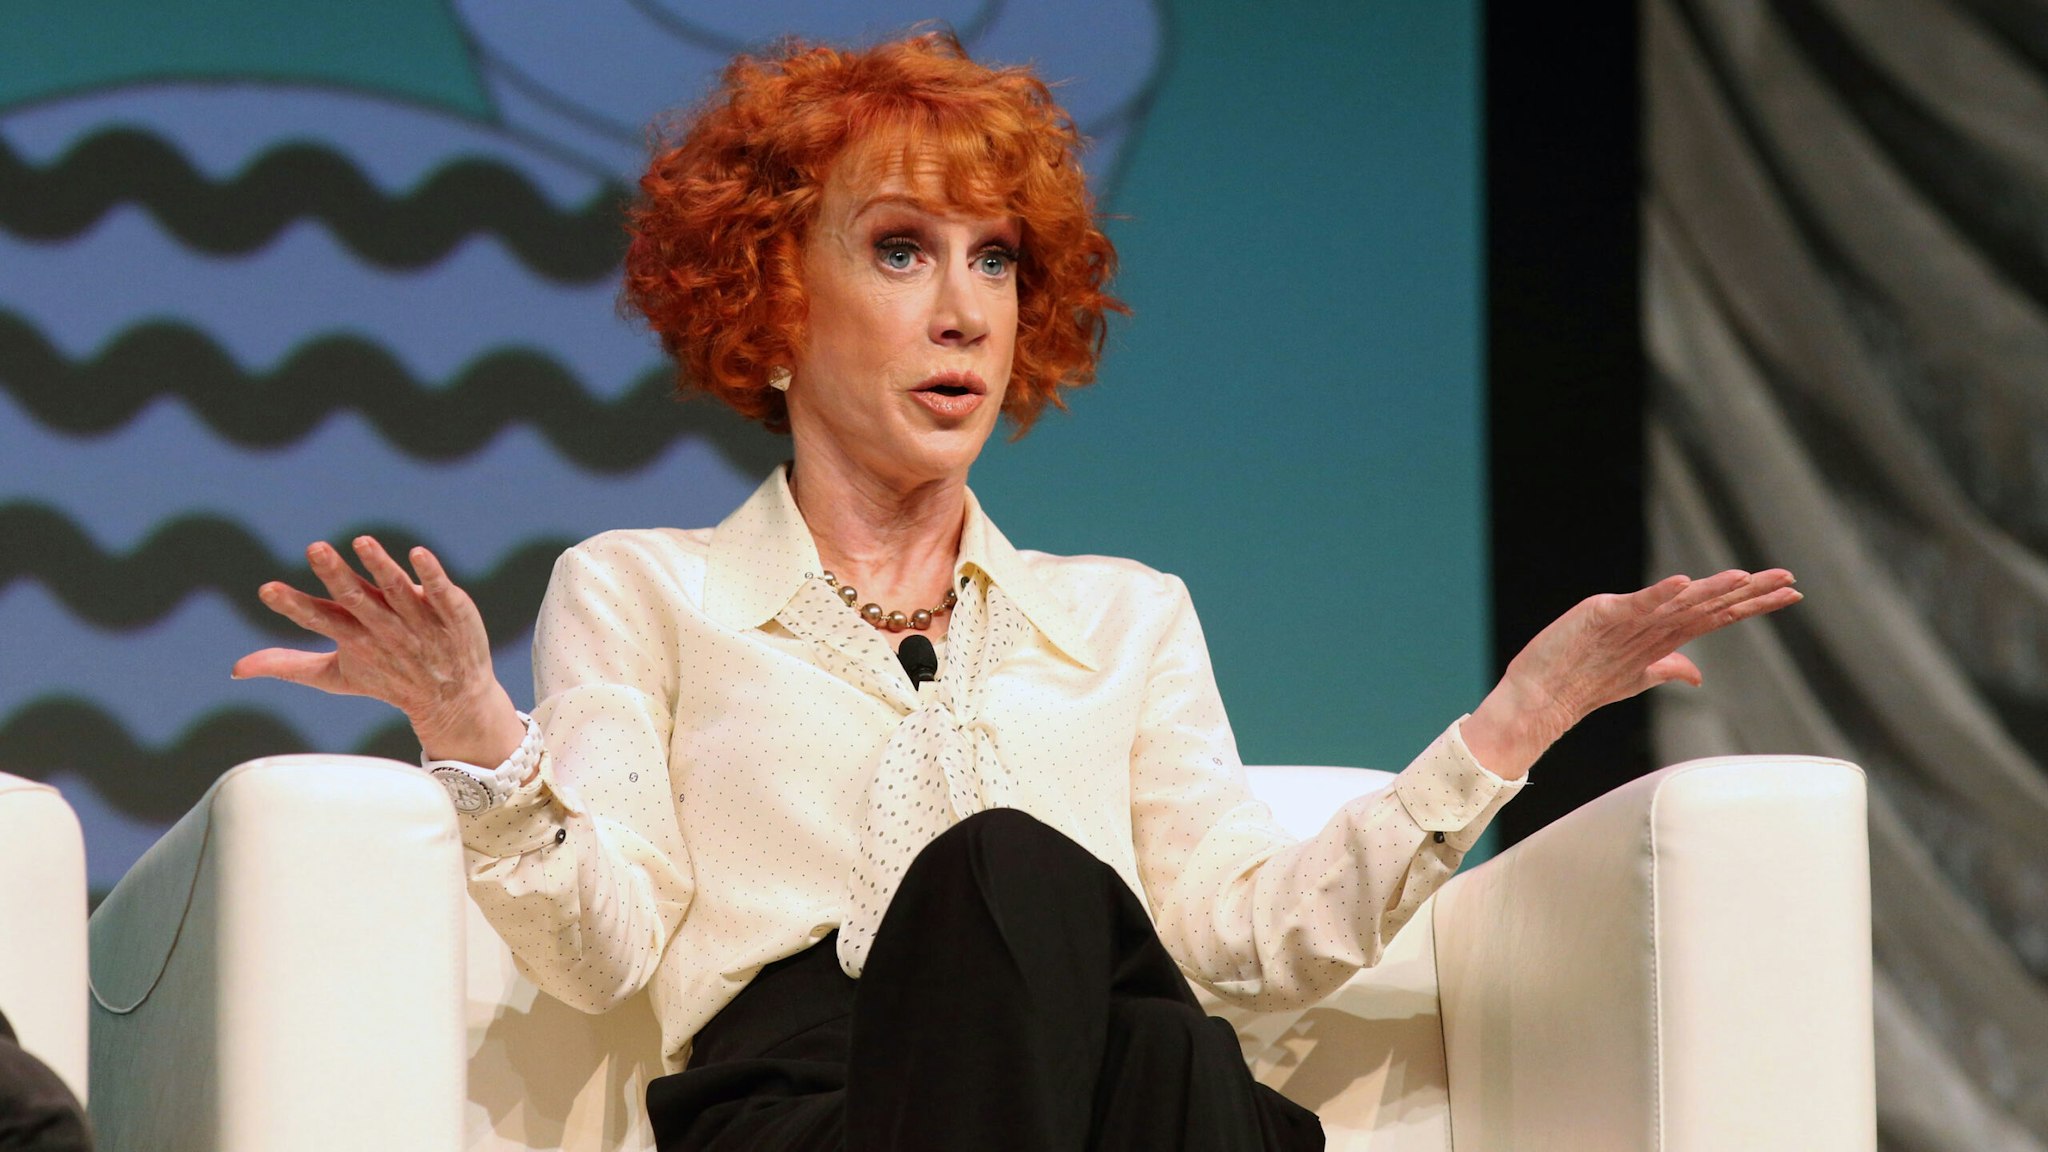 AUSTIN, TEXAS - MARCH 09: Kathy Griffin speaks onstage at "Convergence Keynote: Kathy Griffin" at the Austin Convention Center during the SXSW Conference And Festival on March 9, 2019 in Austin, Texas.